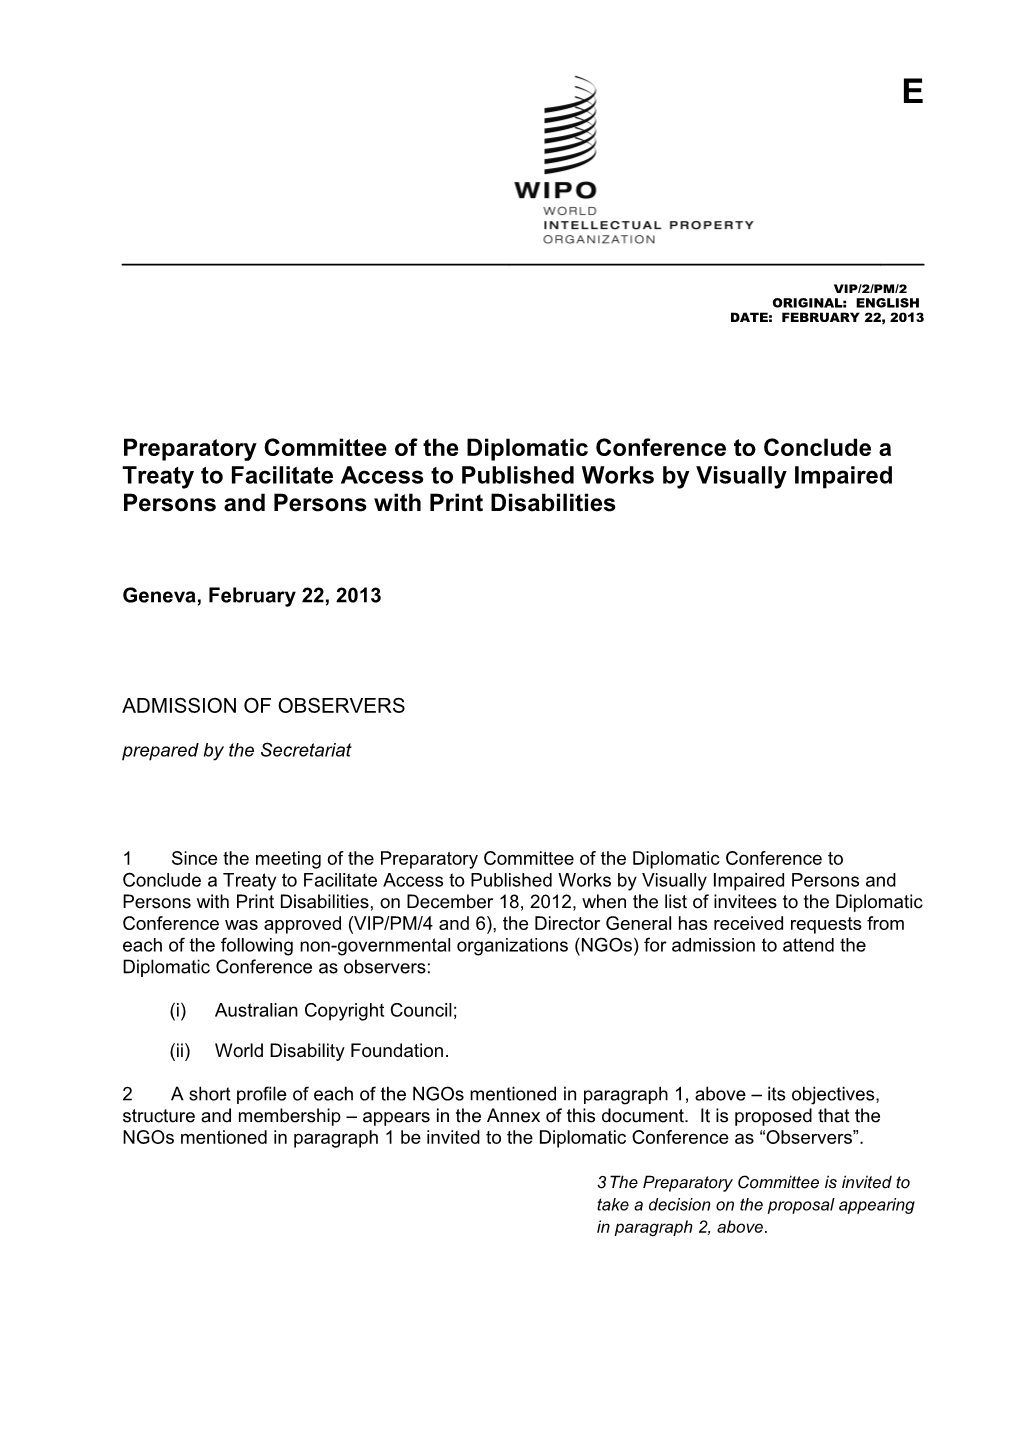 Preparatory Committee of the Diplomatic Conference to Conclude a Treaty to Facilitate